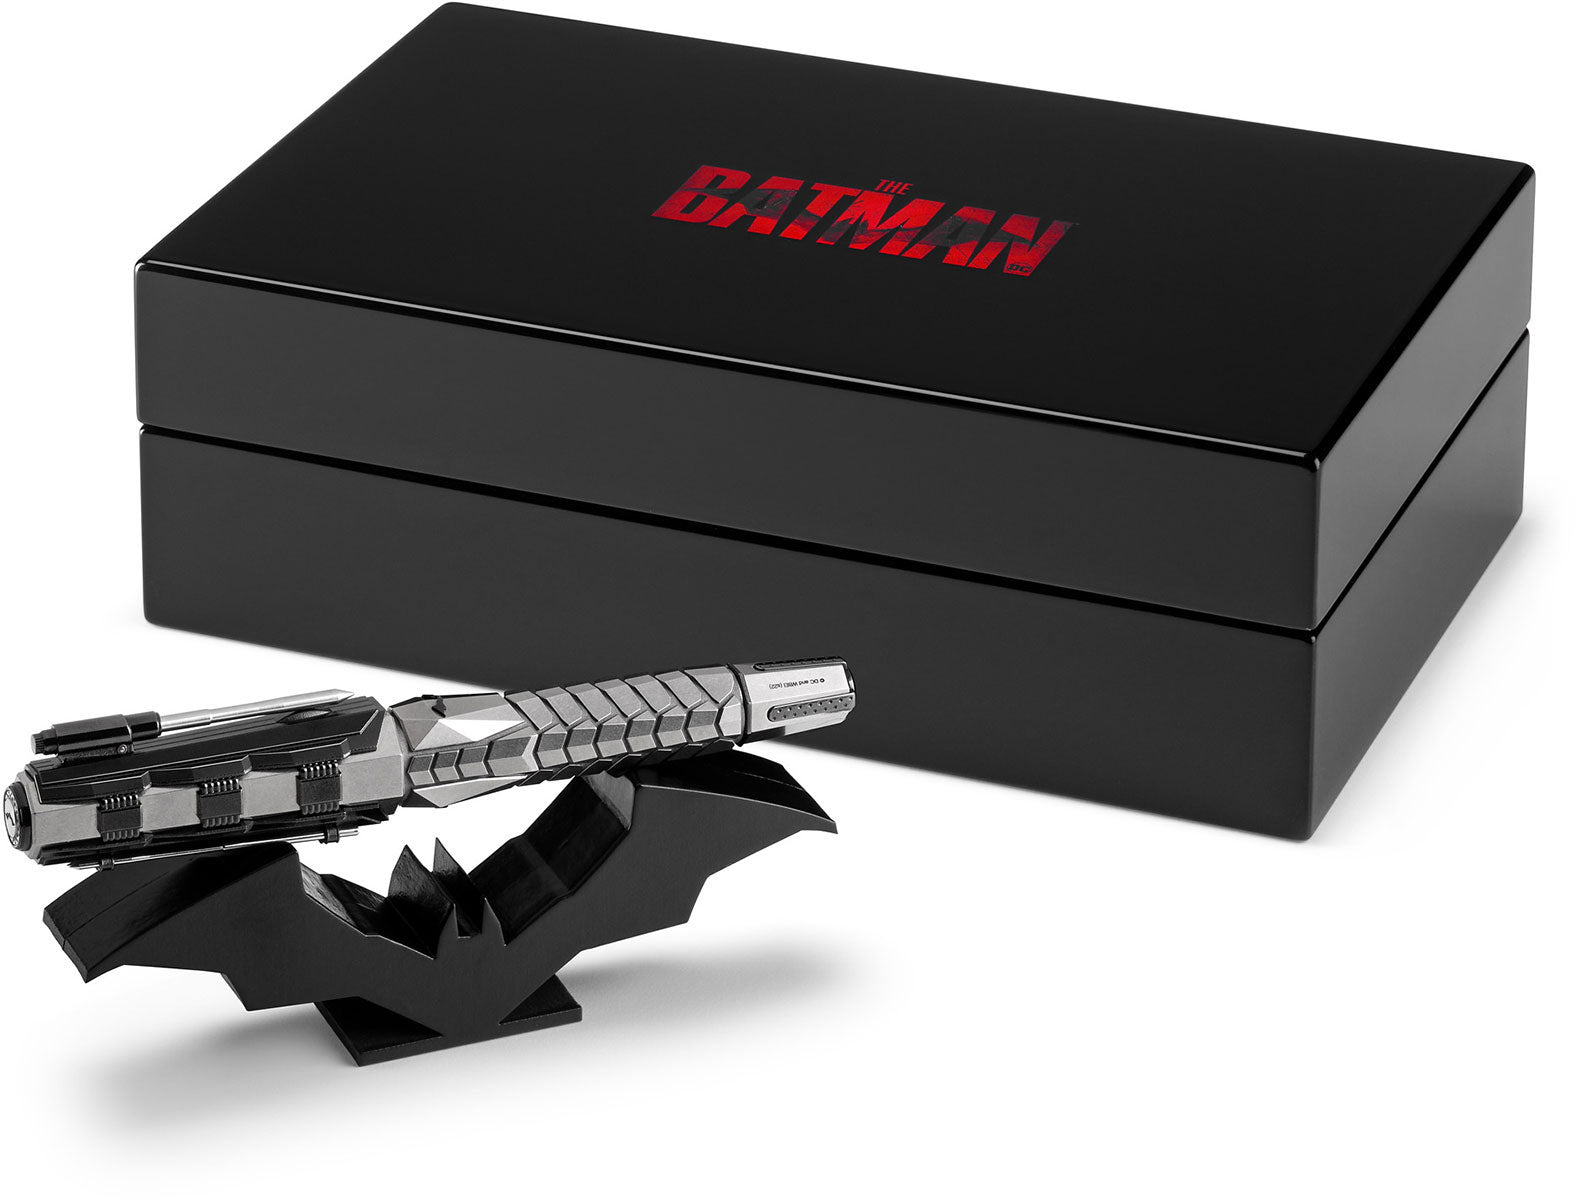 Montegrappa "The Batman" Write With A Vengeance Limited Edition Rollerball Pen